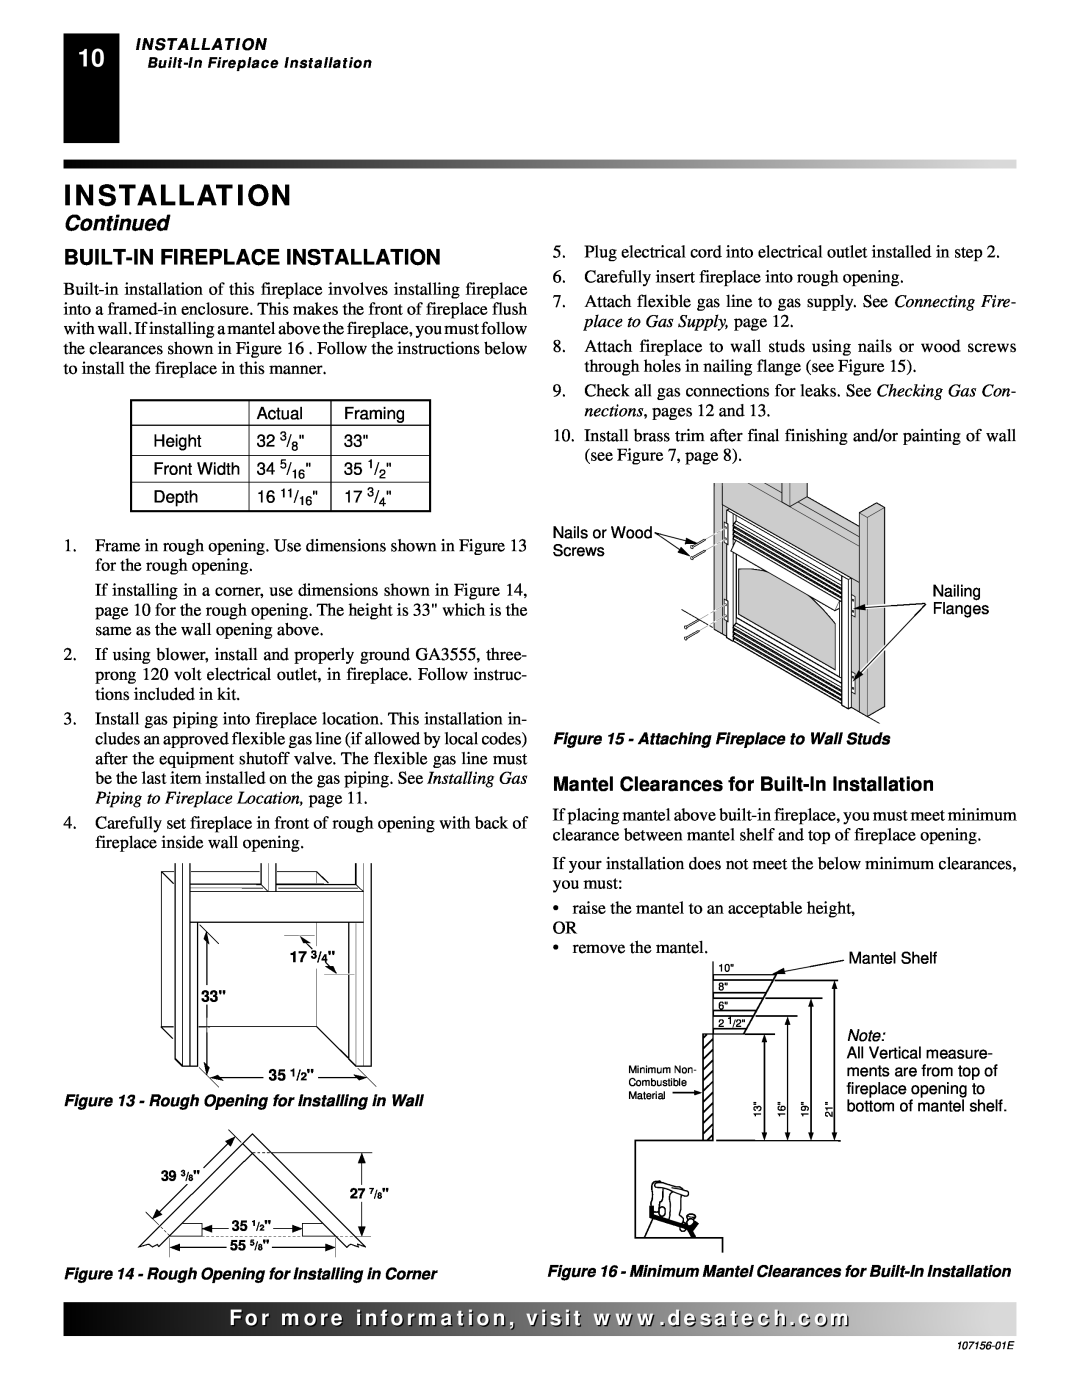 Vanguard Heating 107156-01E.pdf Built-Infireplace Installation, Mantel Clearances for Built-InInstallation, Continued 